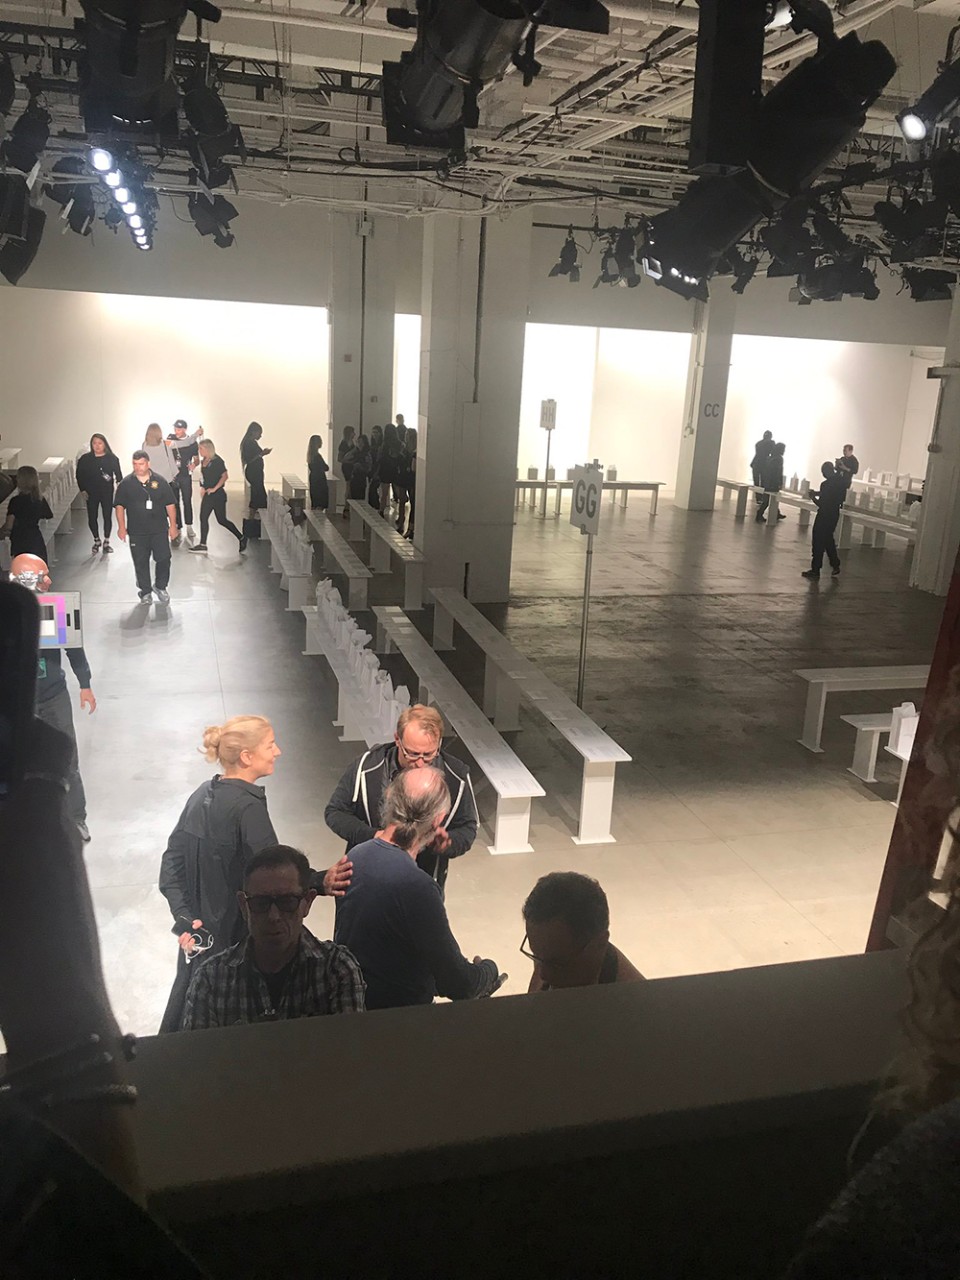 The students toured a gallery where, hours later, a runway show would take place. Pictured is a warehouse-style space with empty white benches with fashion week people walking around the space. 